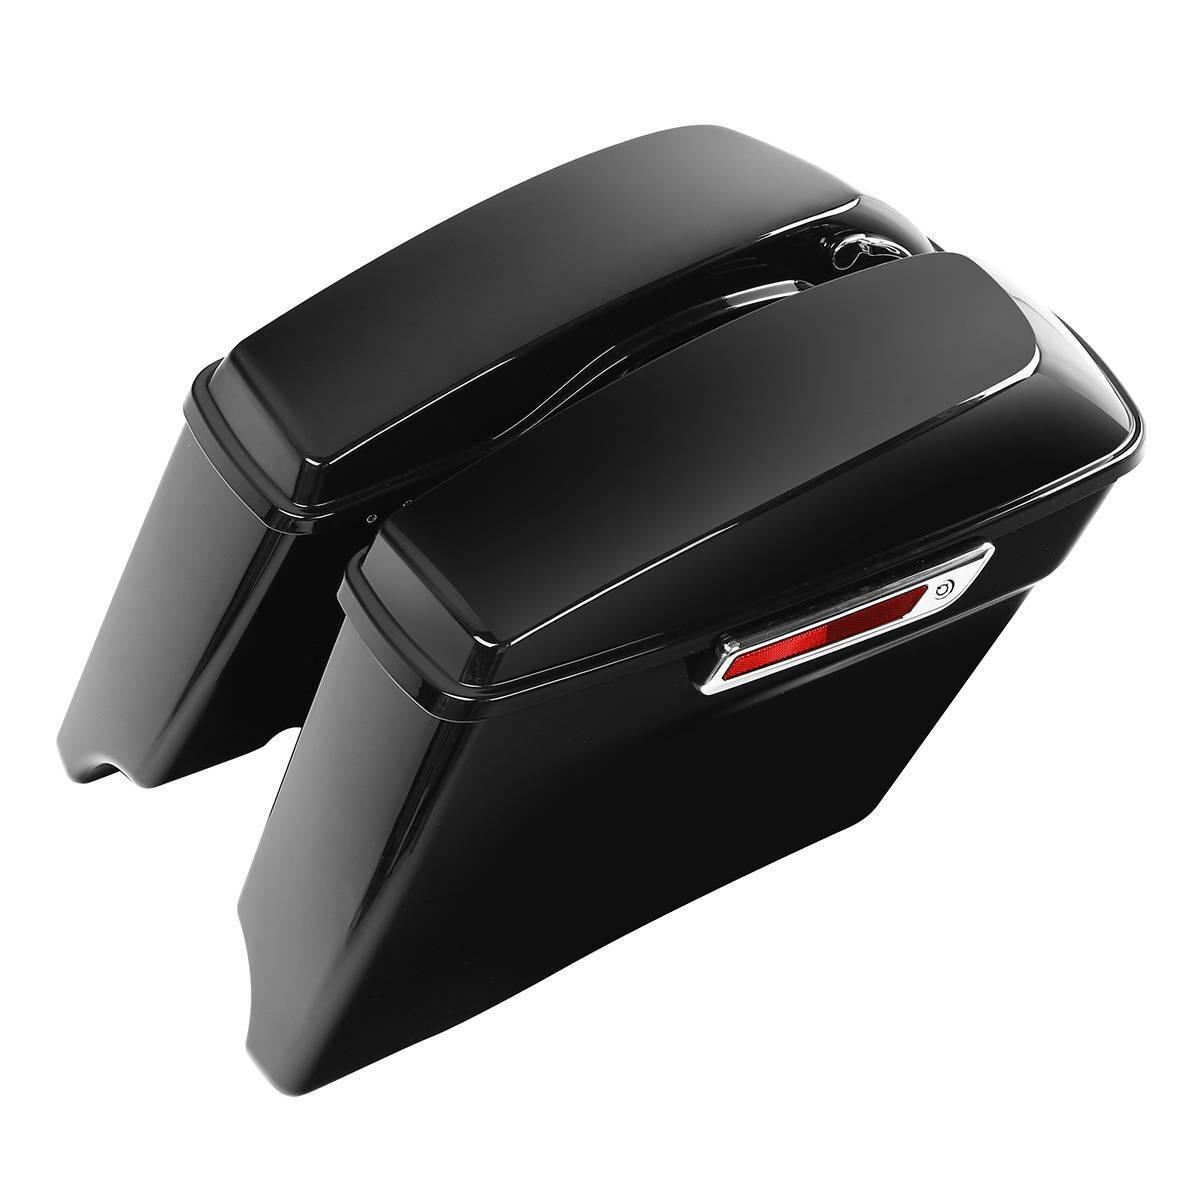 4" Stretched Extended Saddlebags Fit For Harley CVO Touring Road Glide 1993-2013 - Moto Life Products